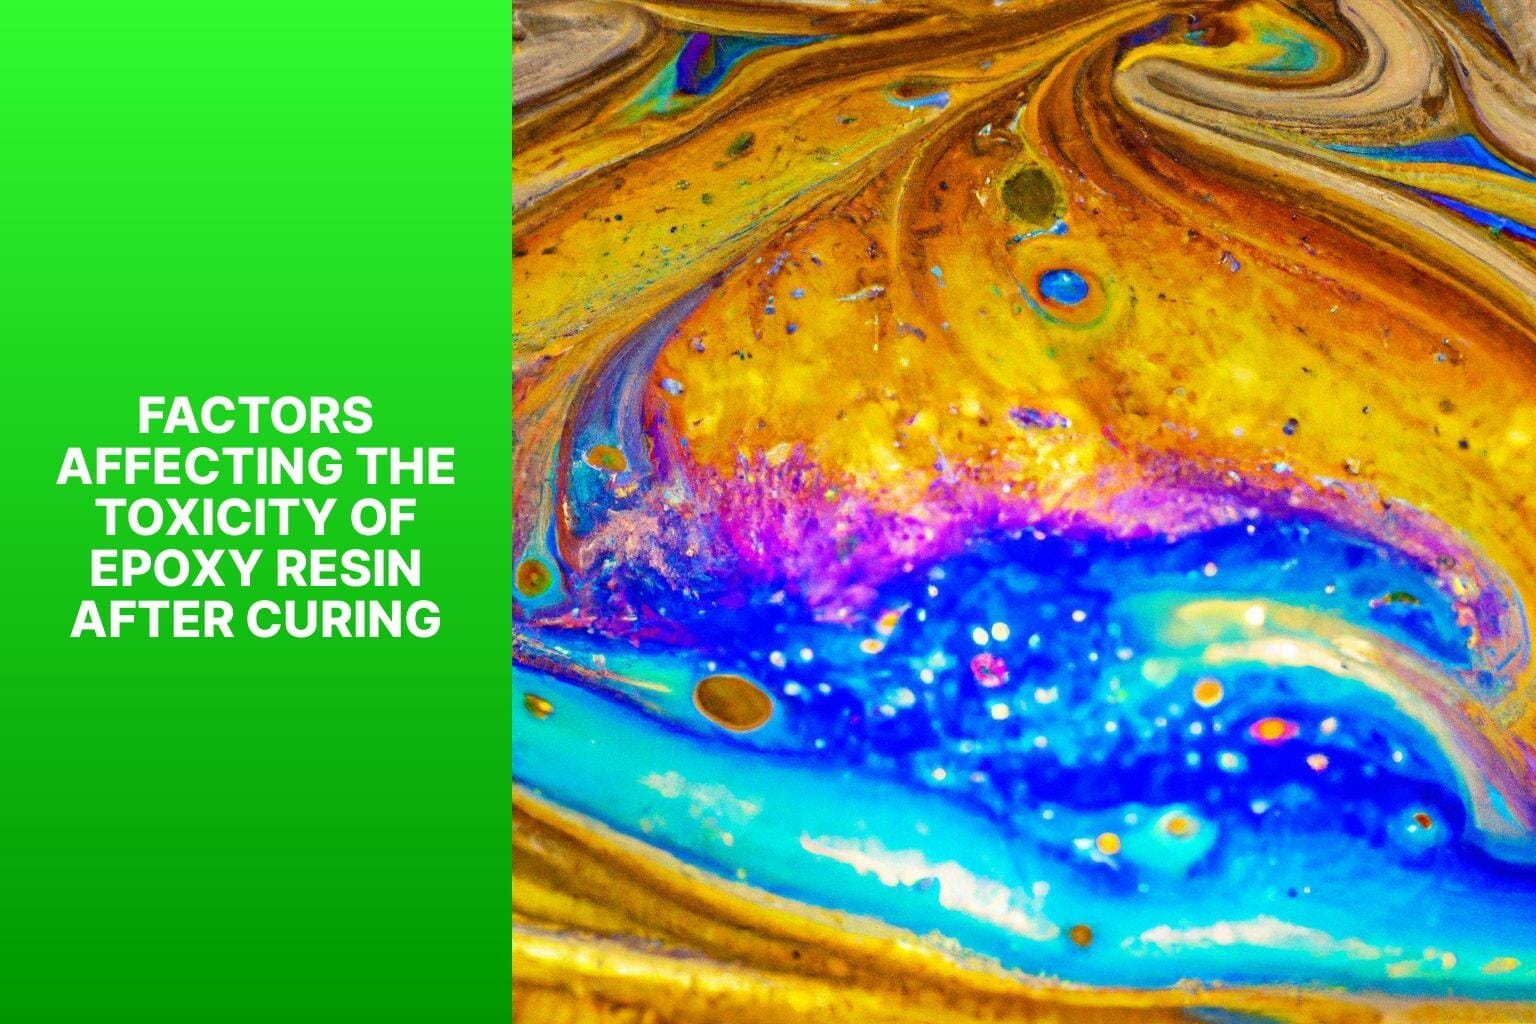 Factors Affecting the Toxicity of Epoxy Resin After Curing - is epoxy resin toxic after curing 